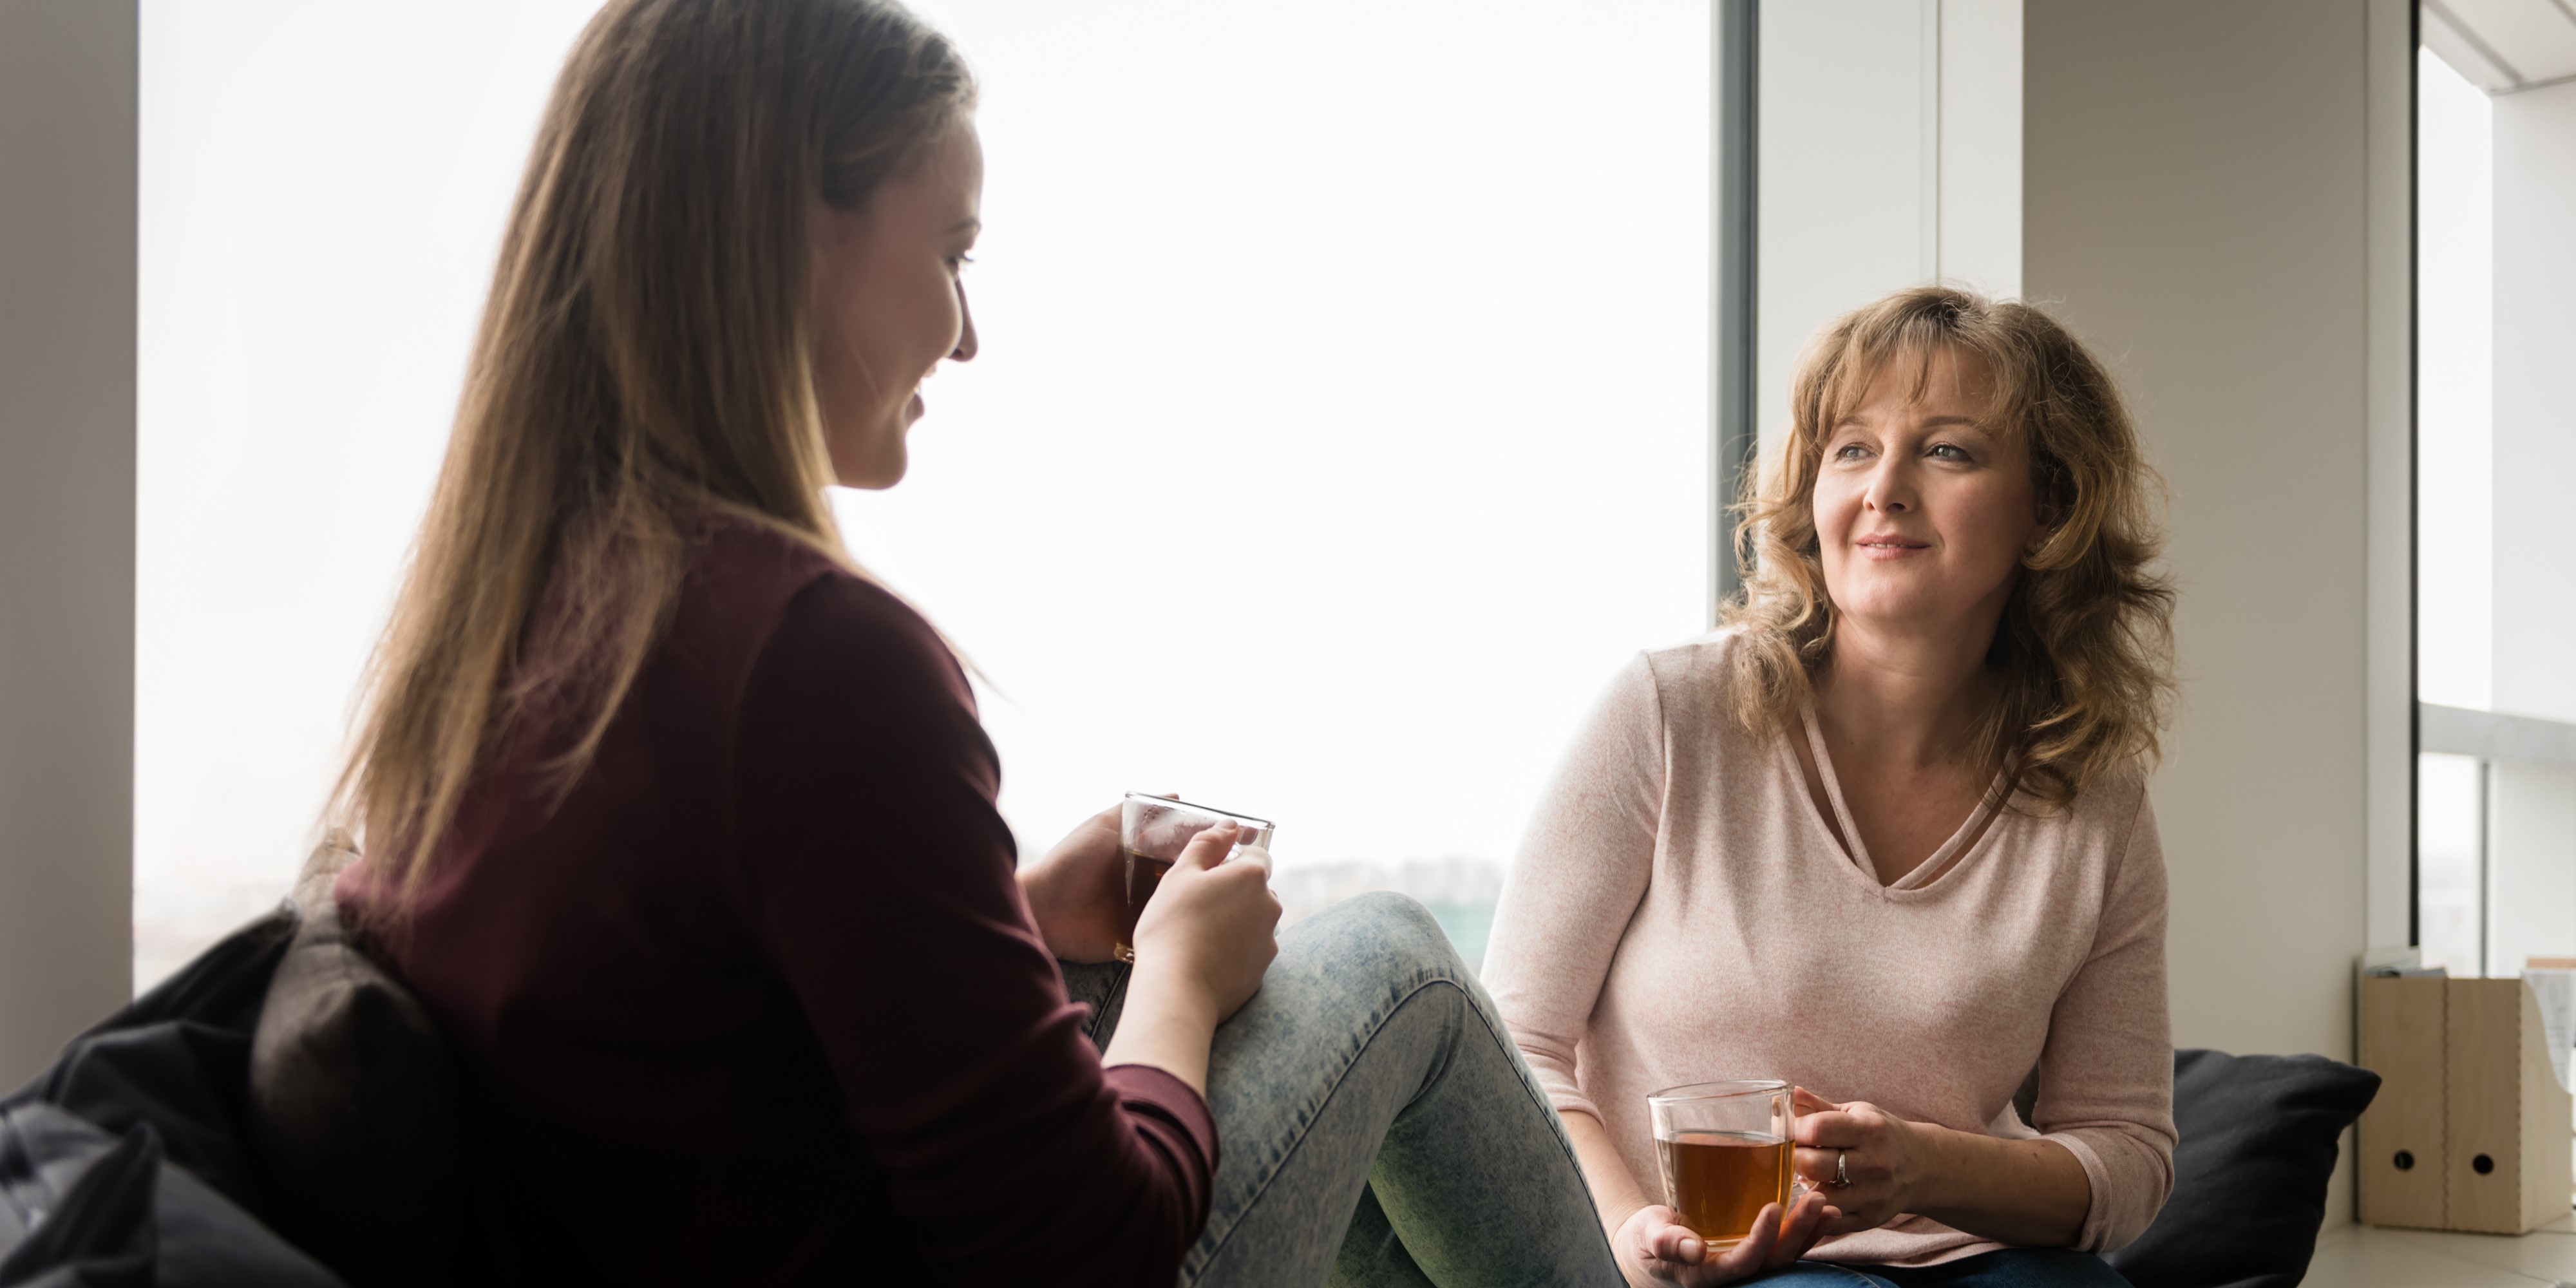 Support worker chatting with lady drinking tea